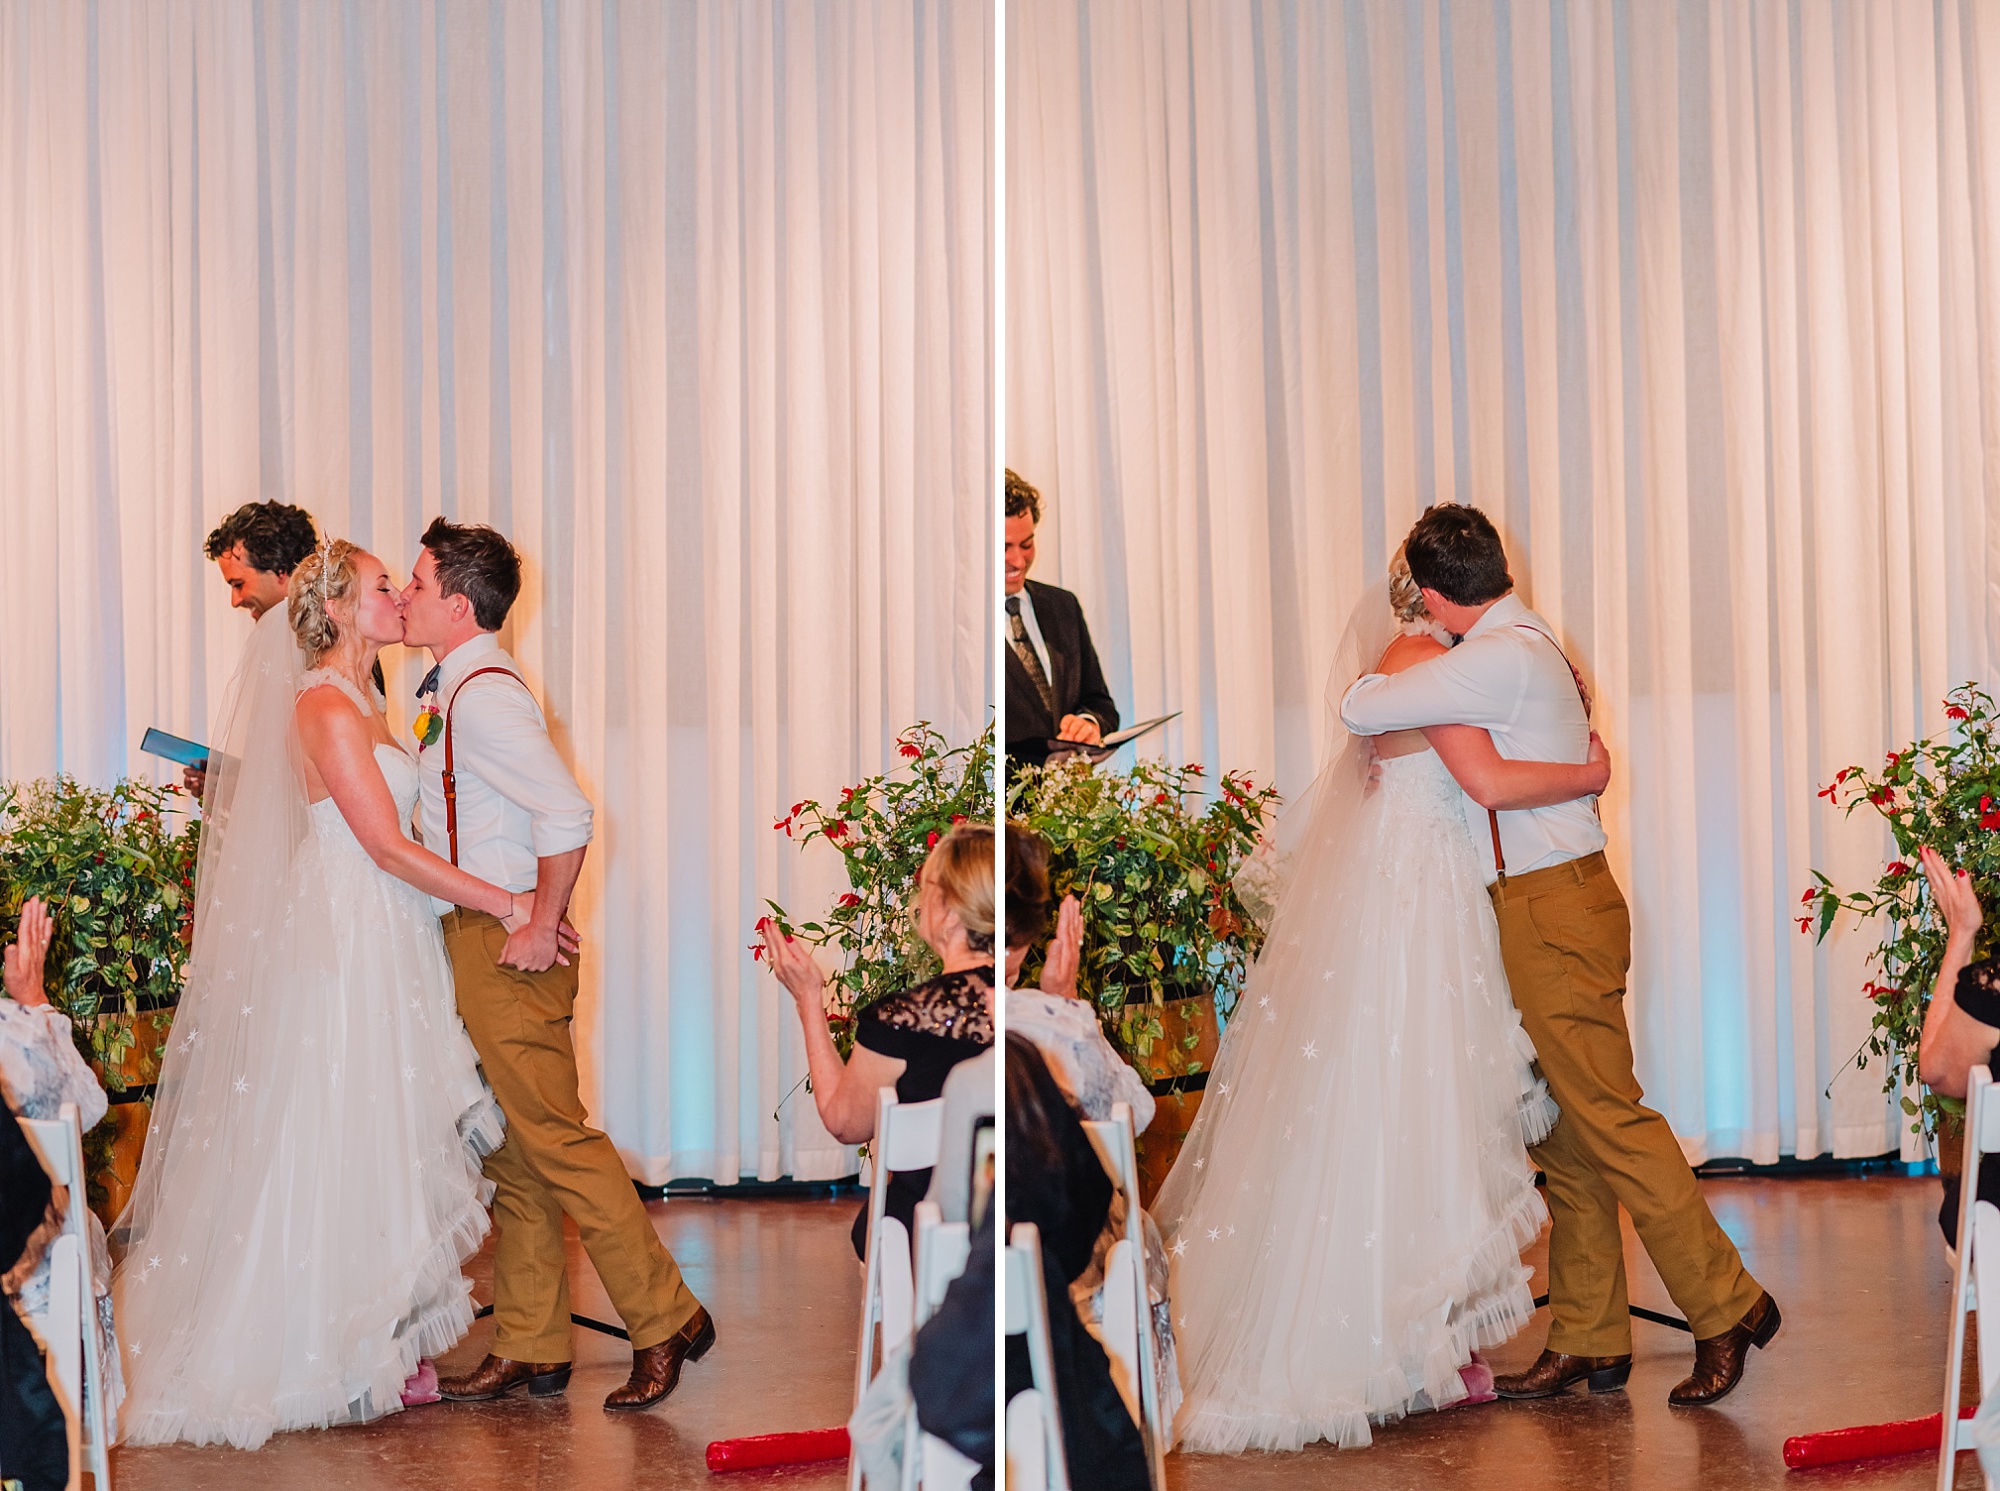 bride and groom first kiss during wedding ceremony